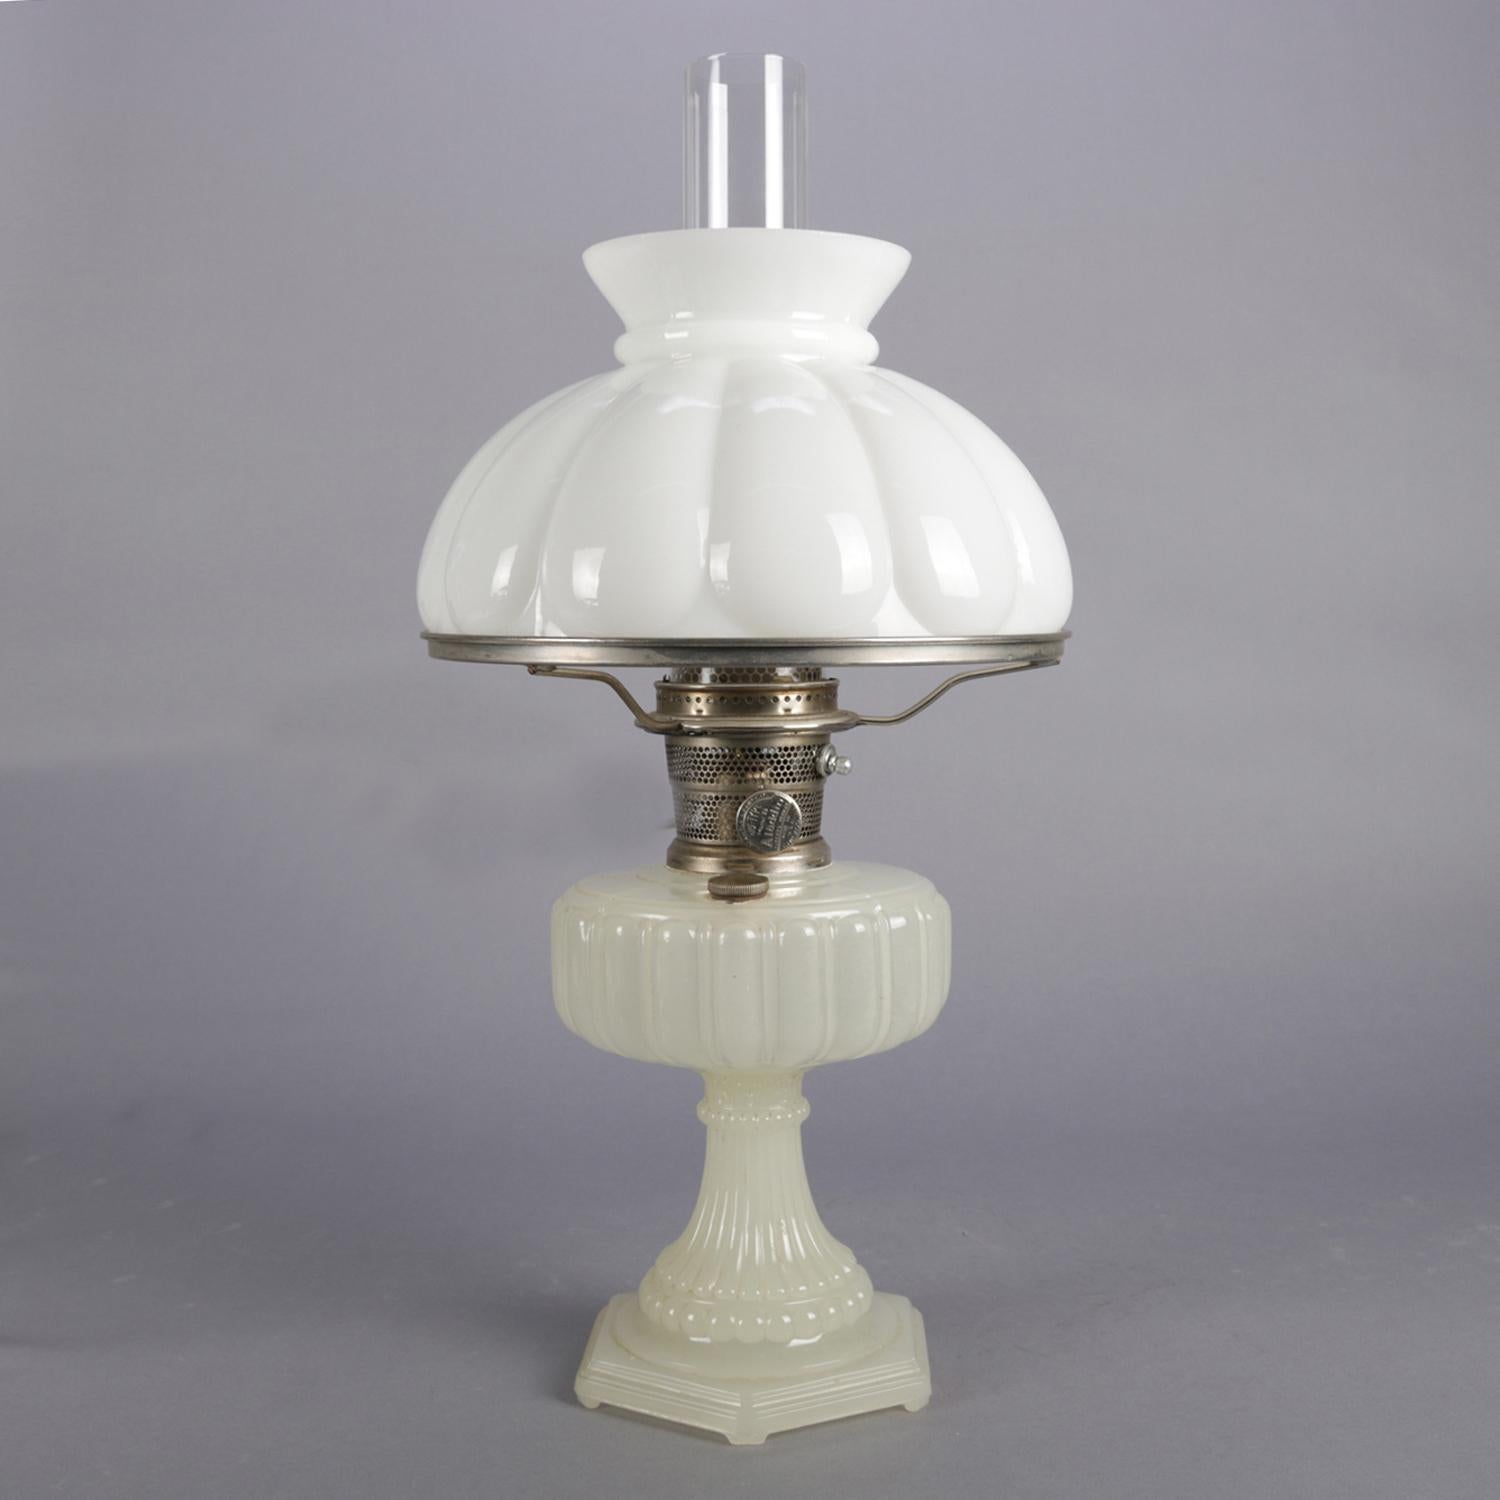 Antique Aladdin Co. table lamp features clambroth glass base with melon form font over reeded and beaded pedestal and over footed base, burner with 